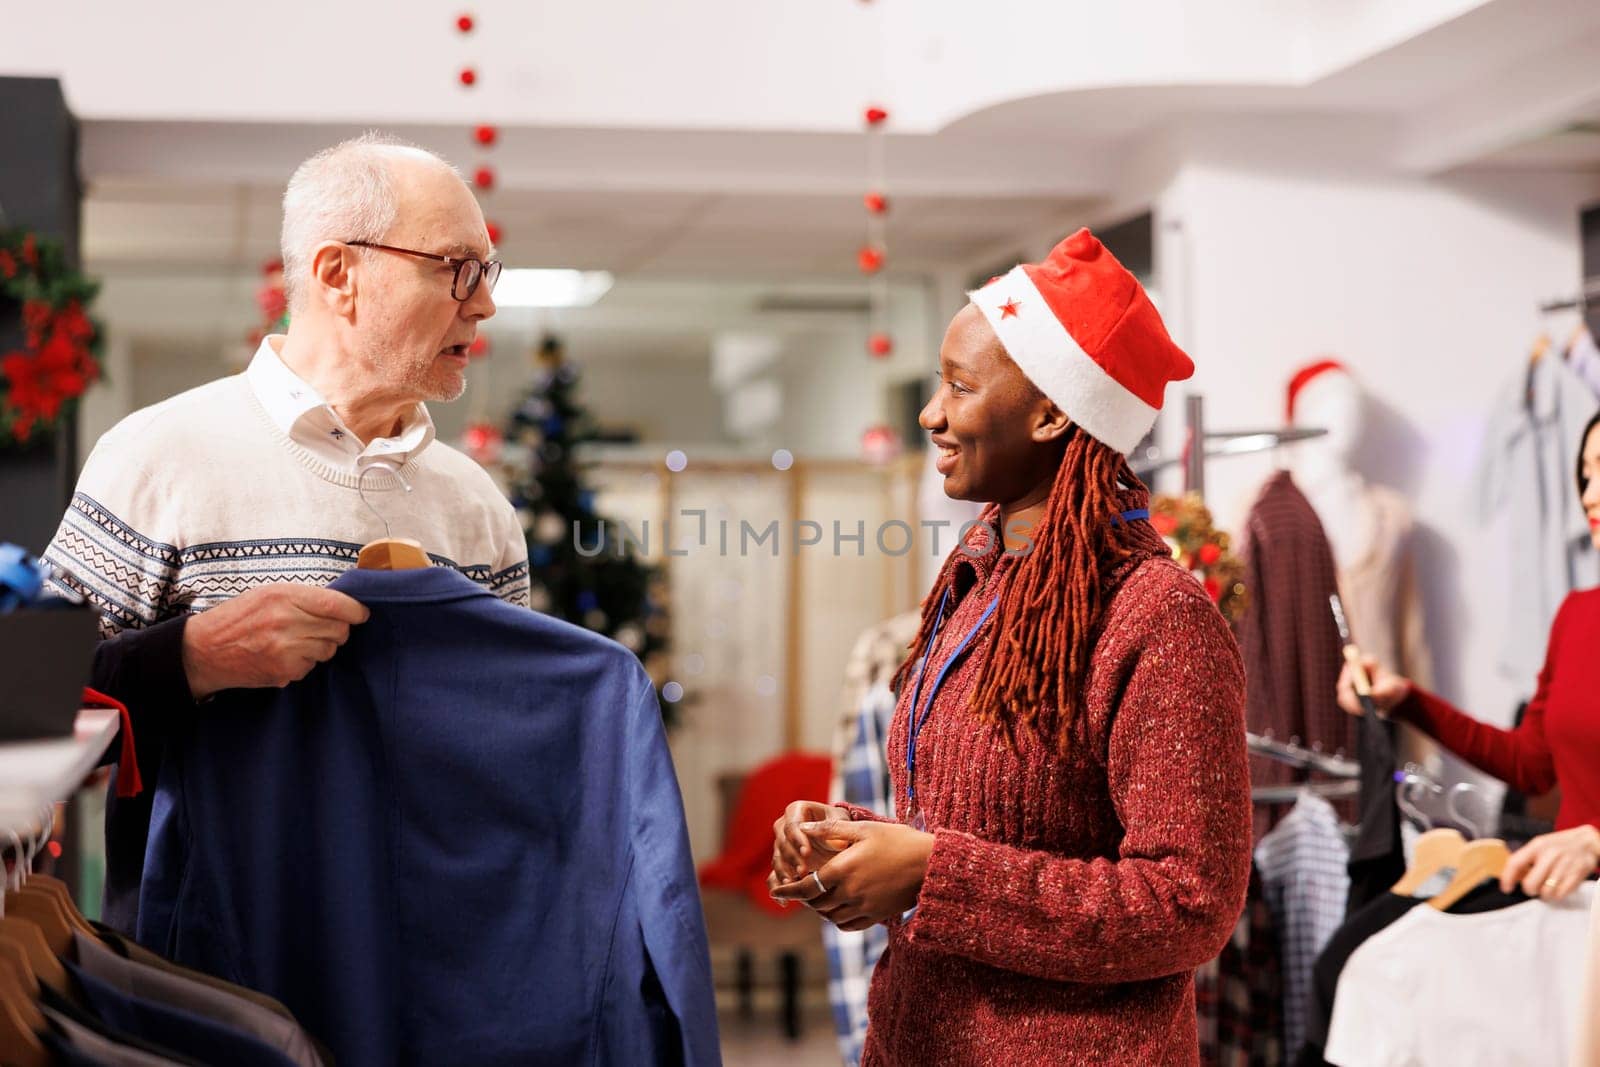 Mall worker showing clothes to client by DCStudio